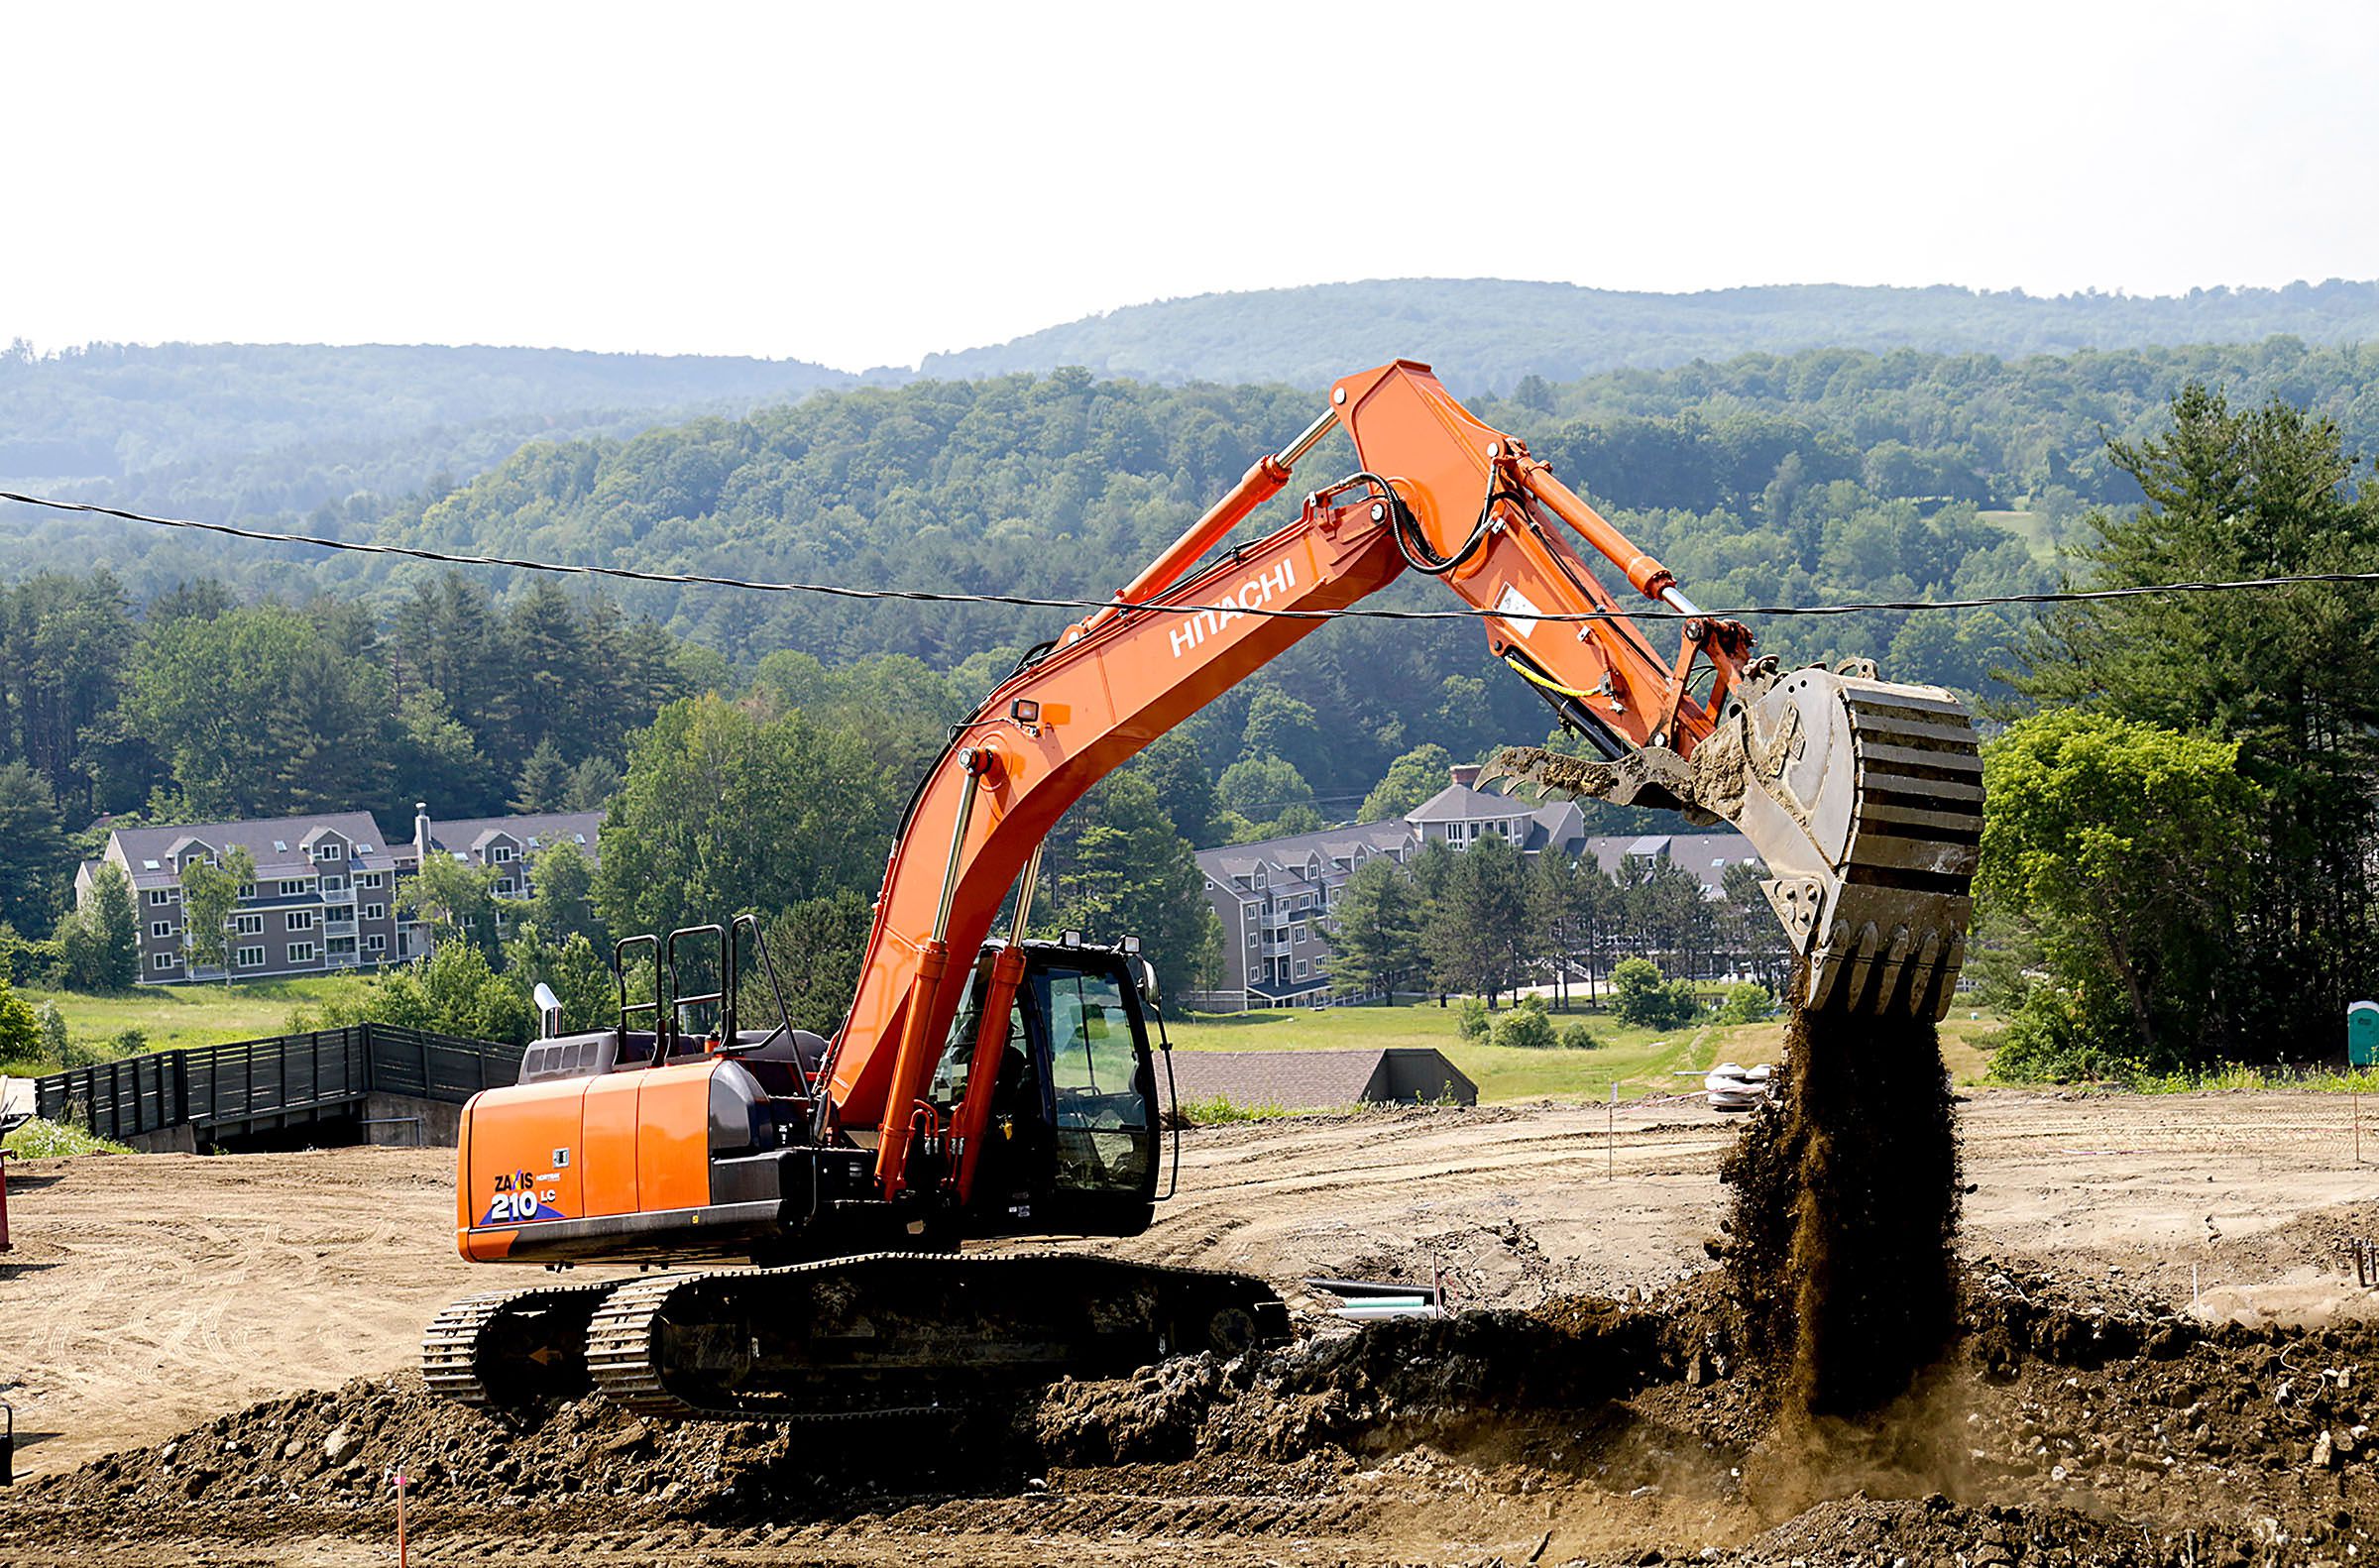 Glenn Seward operates an excavator as he builds new paths at the Ascutney mountain Base Lodge, in Brownsville, Vt., on Monday, July 2, 2018. (Valley News - August Frank) Copyright Valley News. May not be reprinted or used online without permission. Send requests to permission@vnews.com.